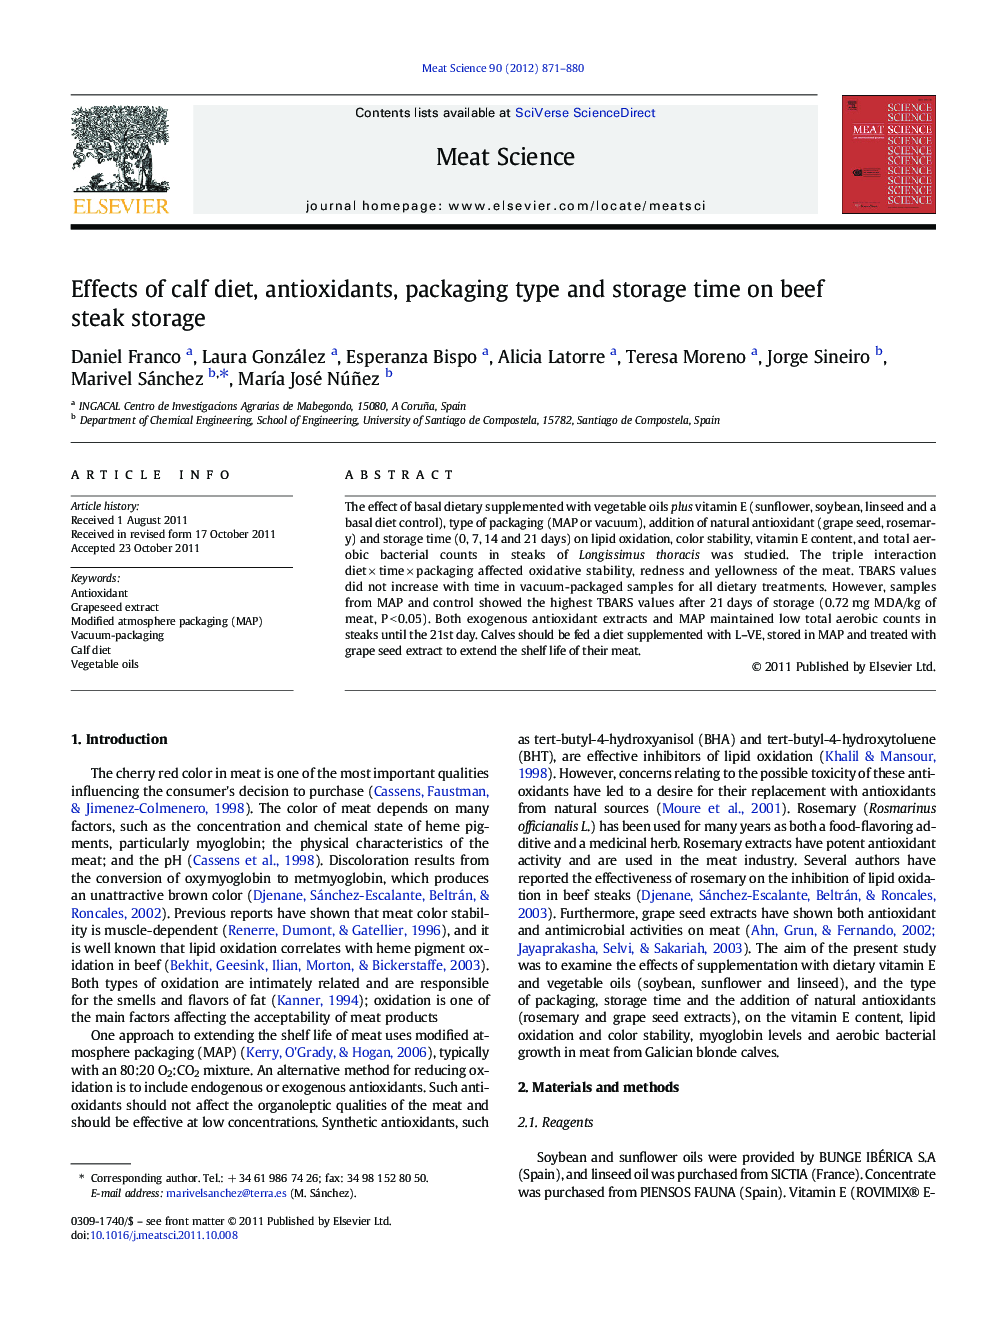 Effects of calf diet, antioxidants, packaging type and storage time on beef steak storage